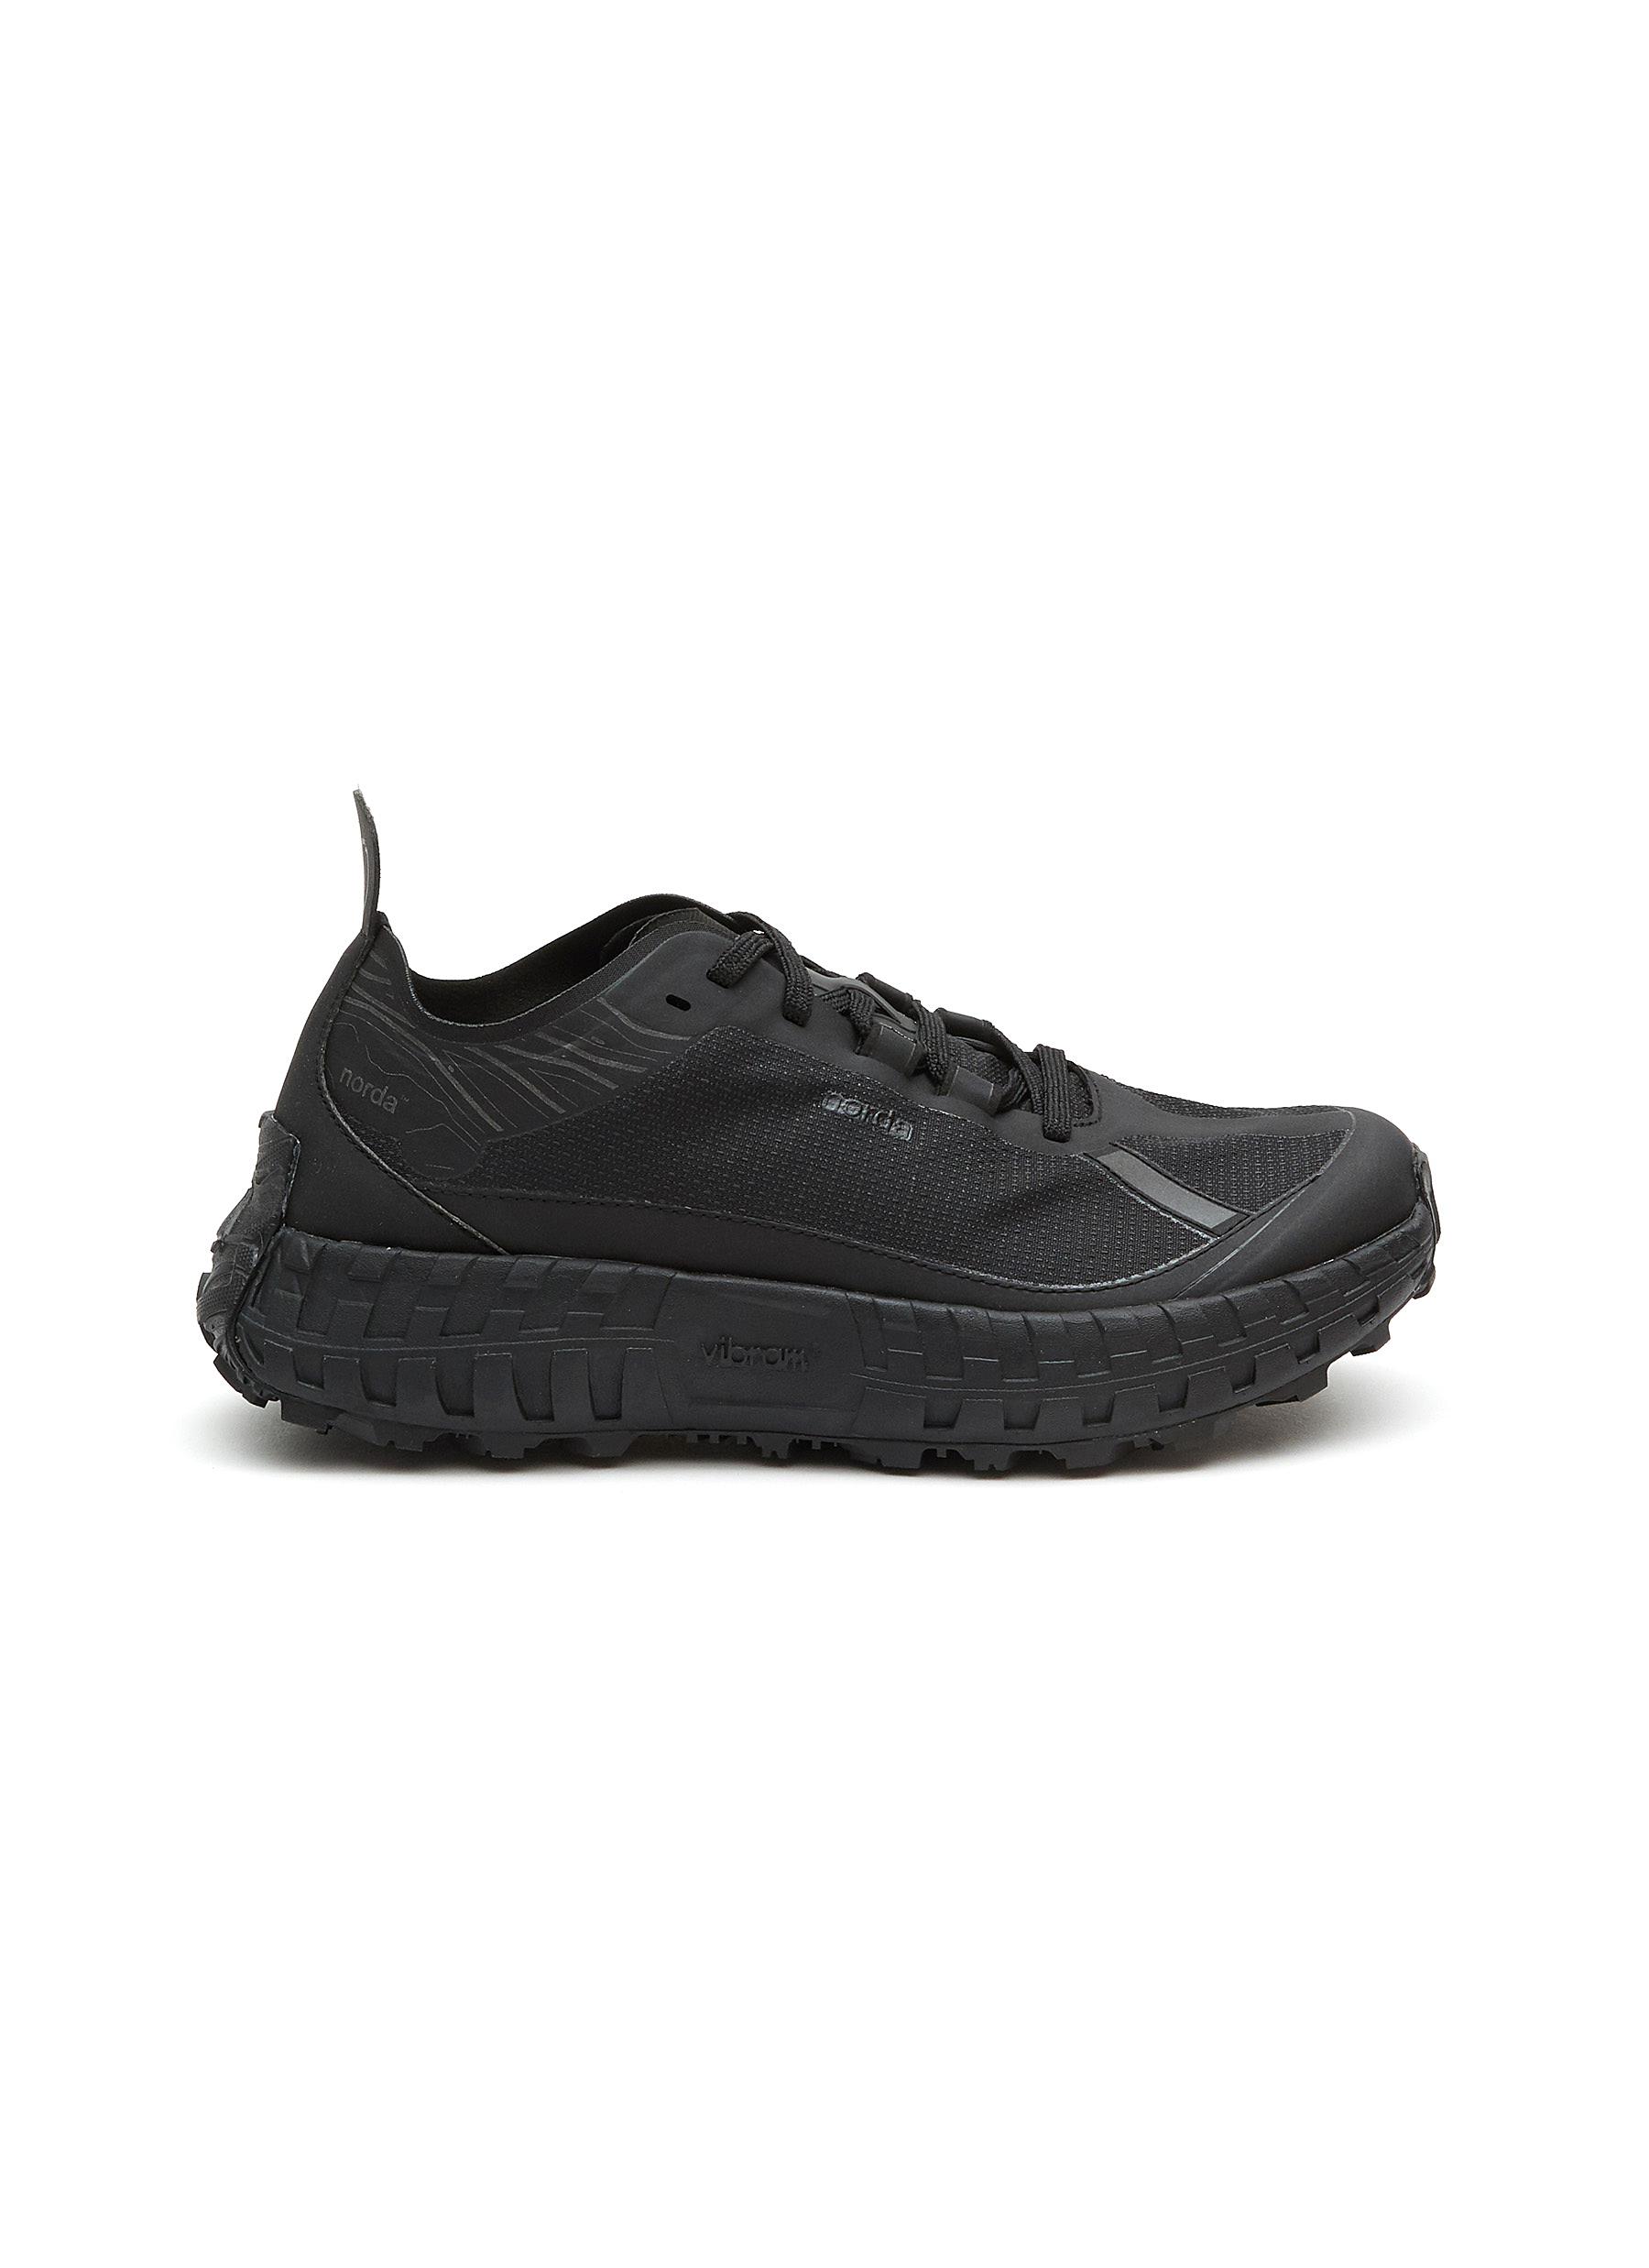 â€˜NORDA 001 G+’ SPIKE LOW TOP LACE UP SNEAKERS